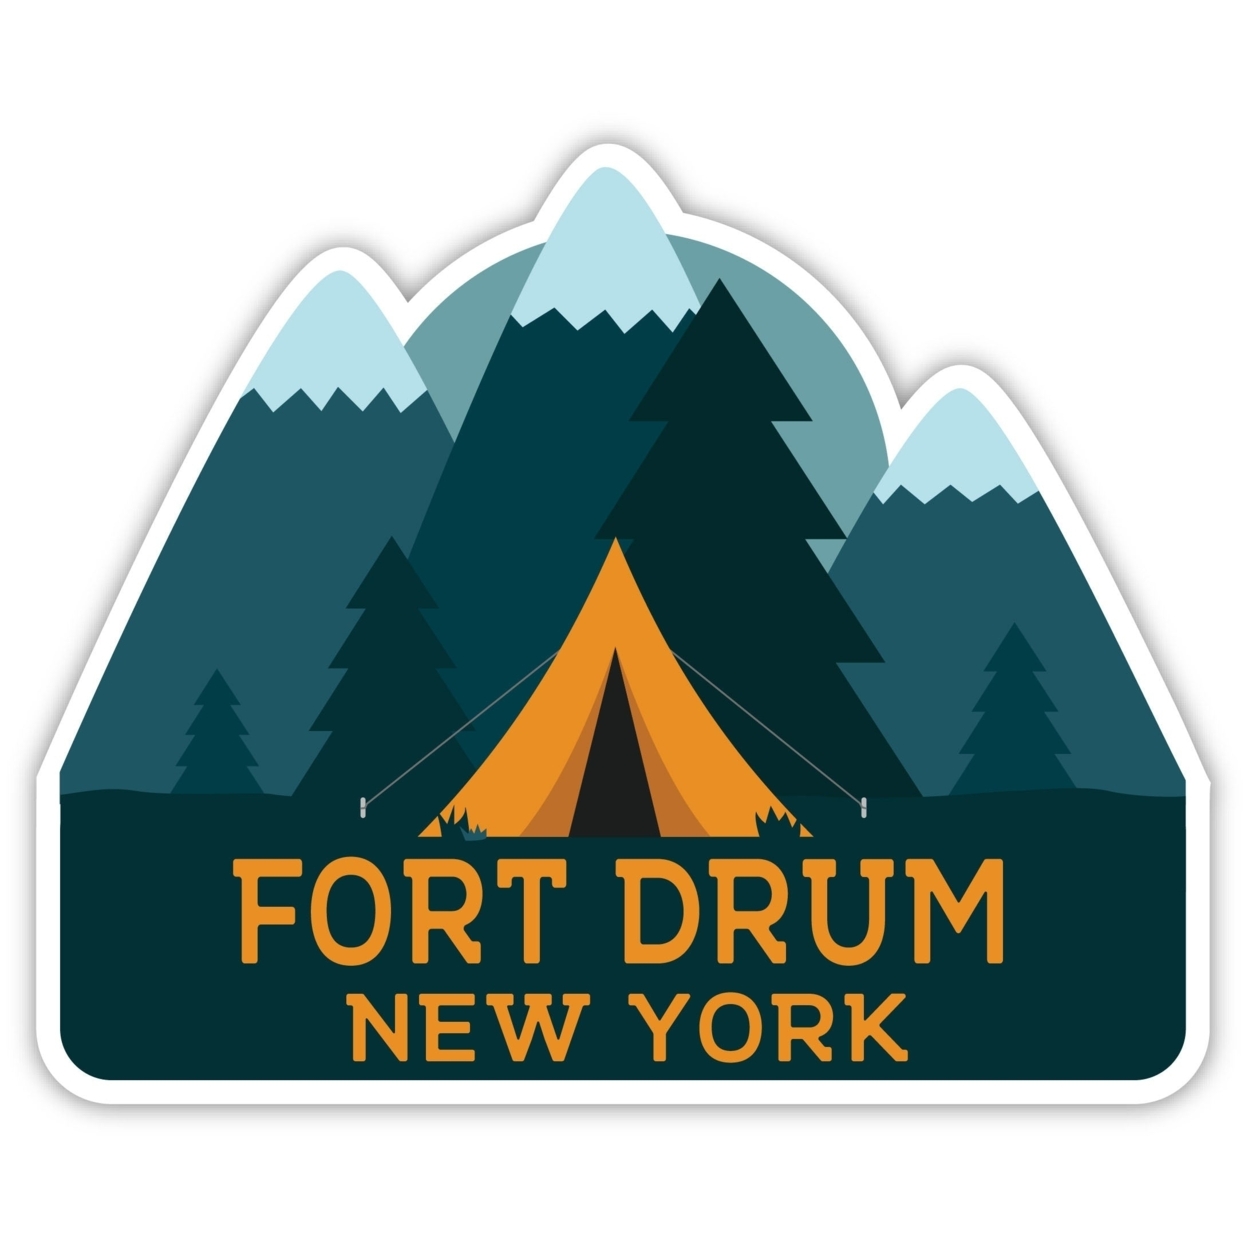 Fort Drum New York Souvenir Decorative Stickers (Choose Theme And Size) - 4-Pack, 2-Inch, Tent